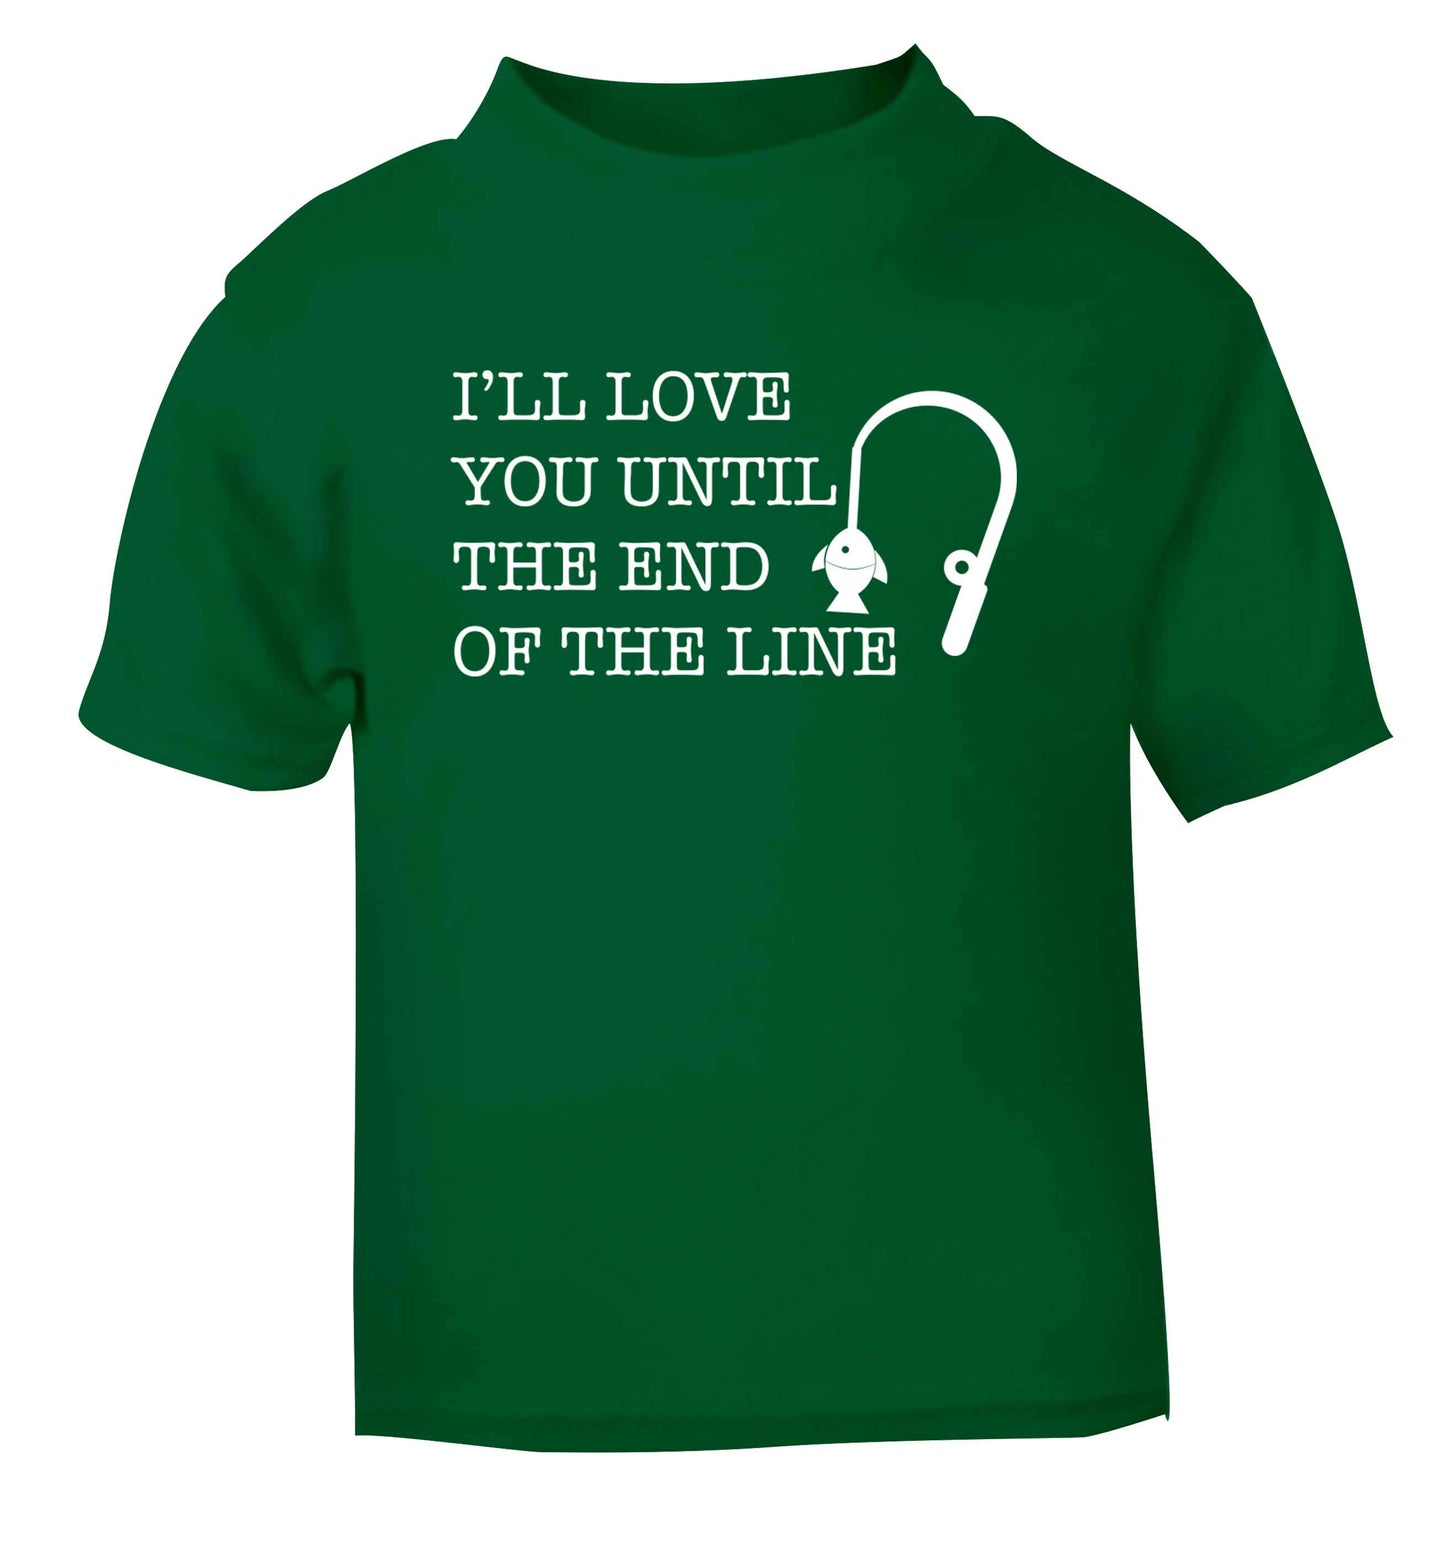 I'll love you until the end of the line green Baby Toddler Tshirt 2 Years